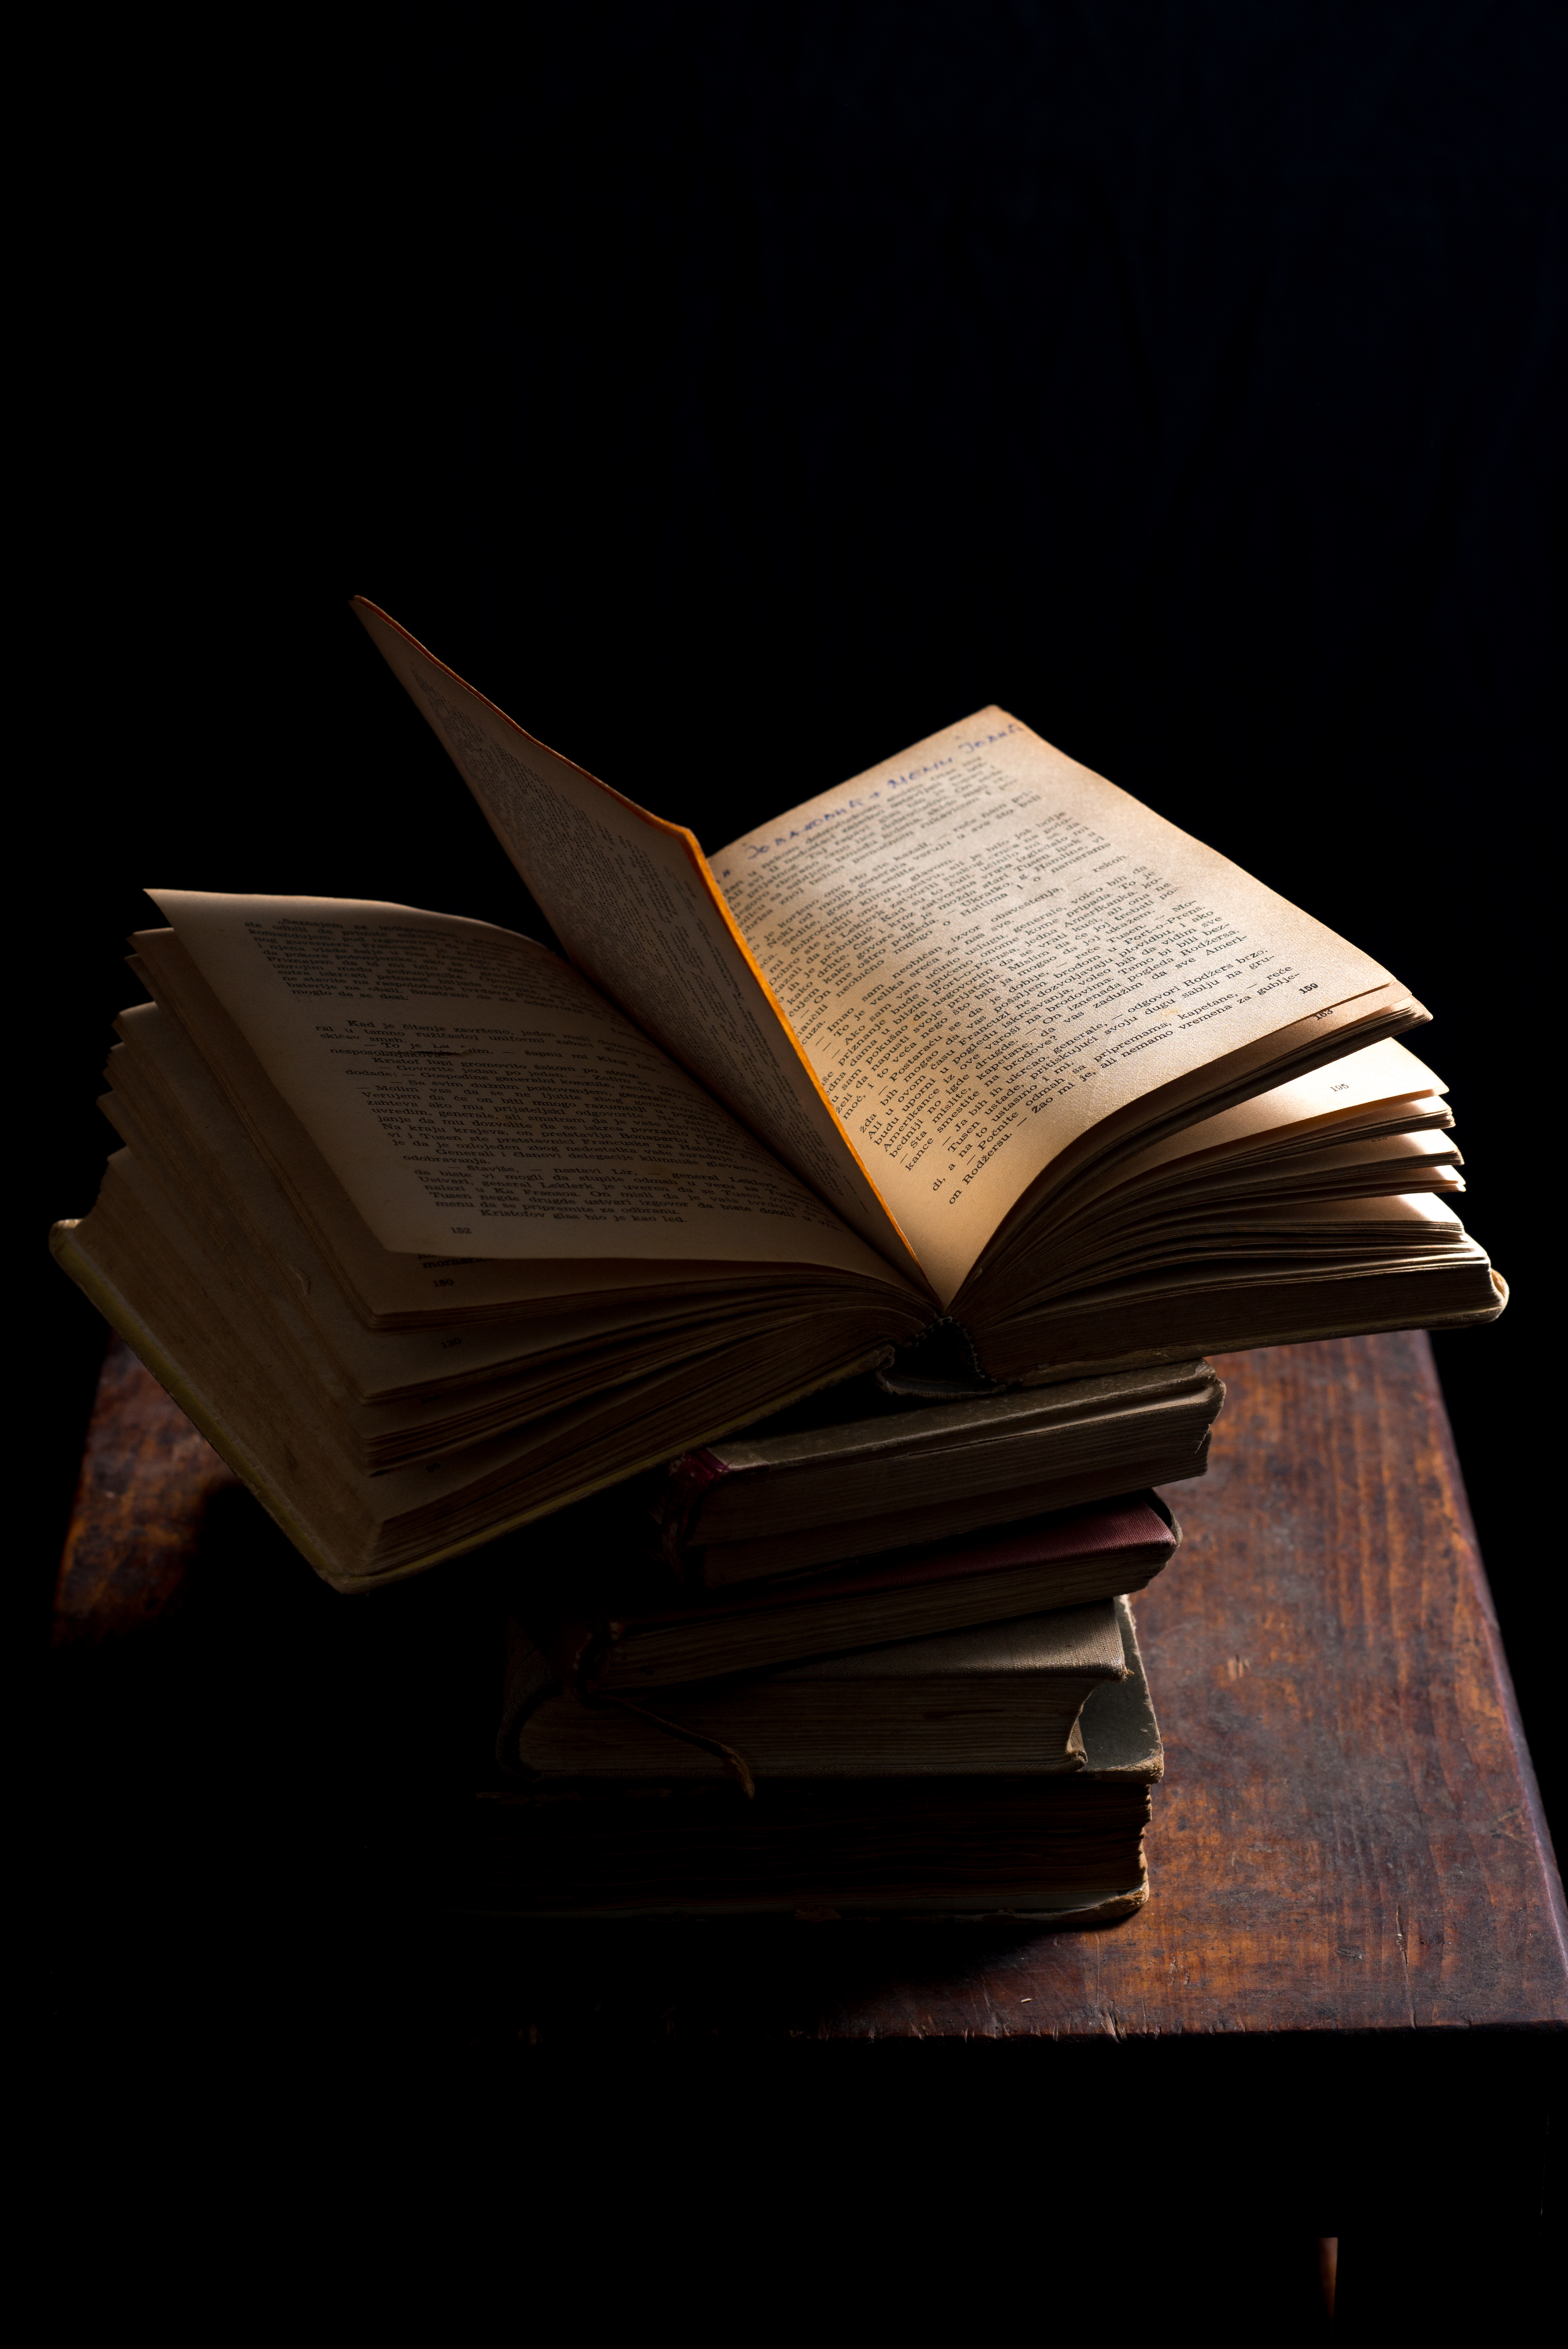 books, miscellanea, miscellaneous, darkness, table, pages, page